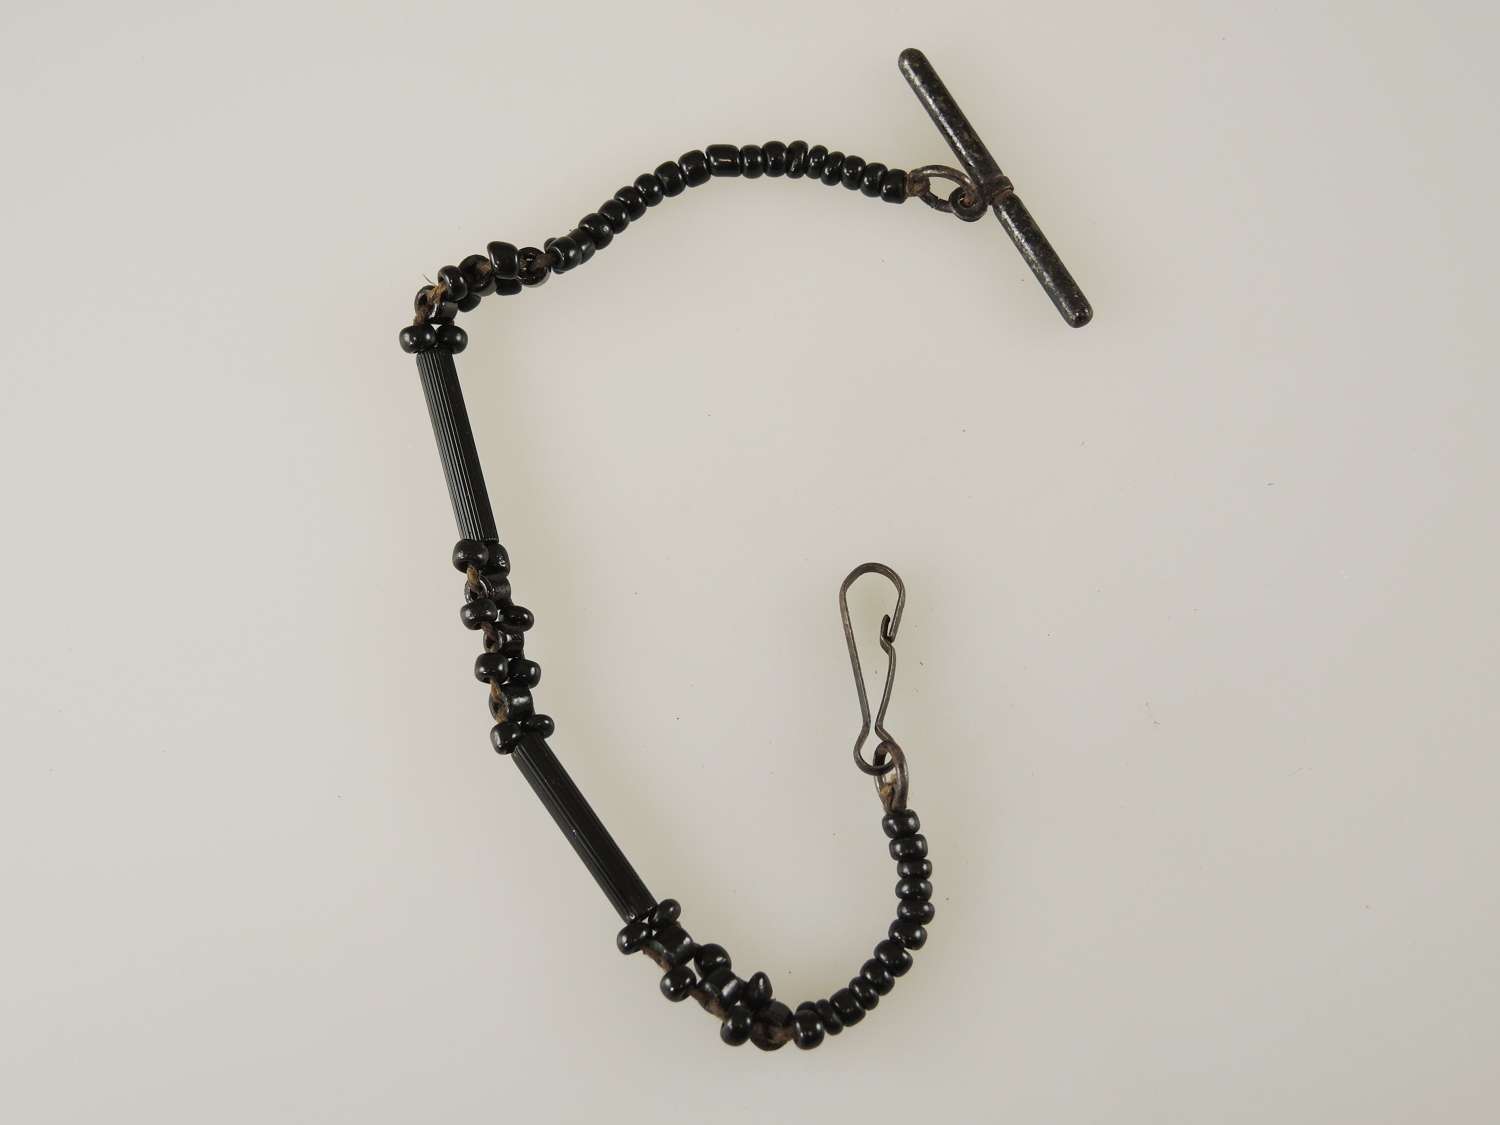 Whitby jet mourning watch chain c1880